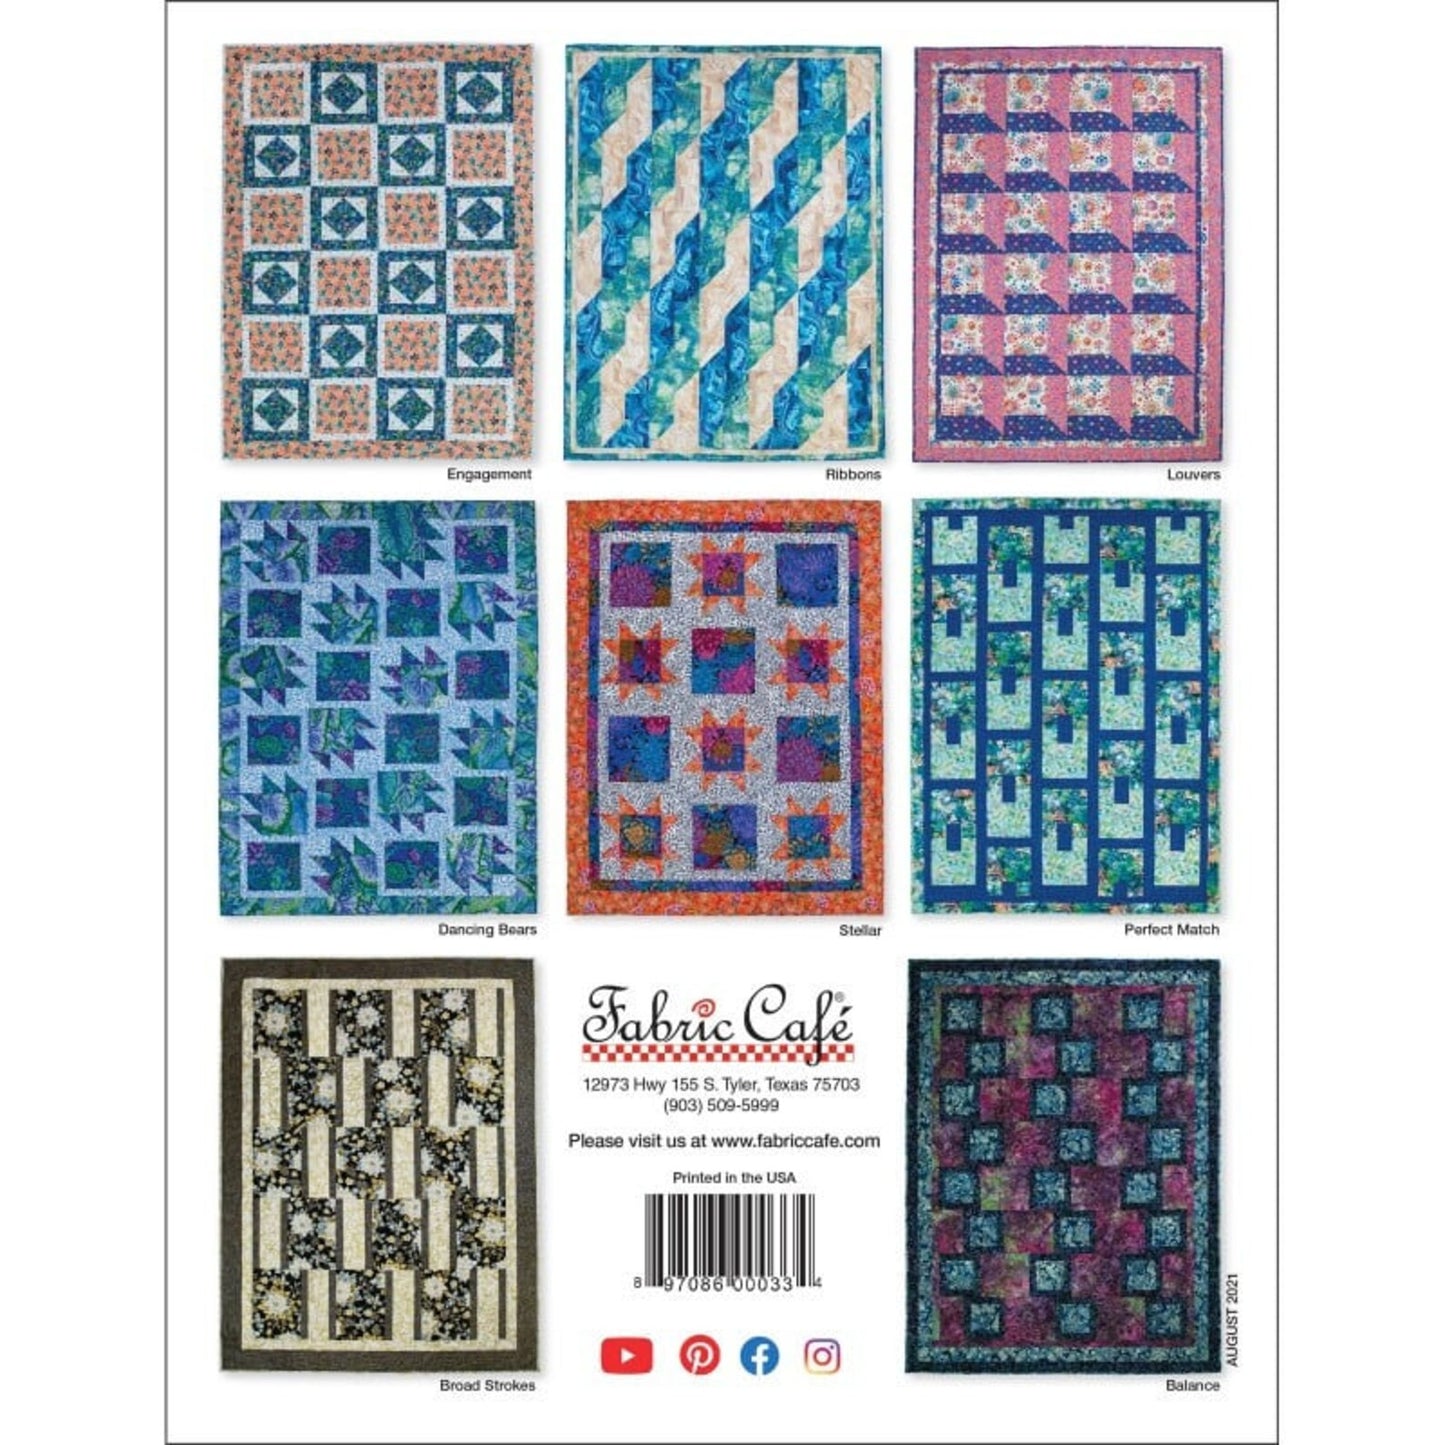 3 YARD QUILTS ON THE DOUBLE 8 quilt designs DONNA ROBERTSON For FABRIC CAFE!